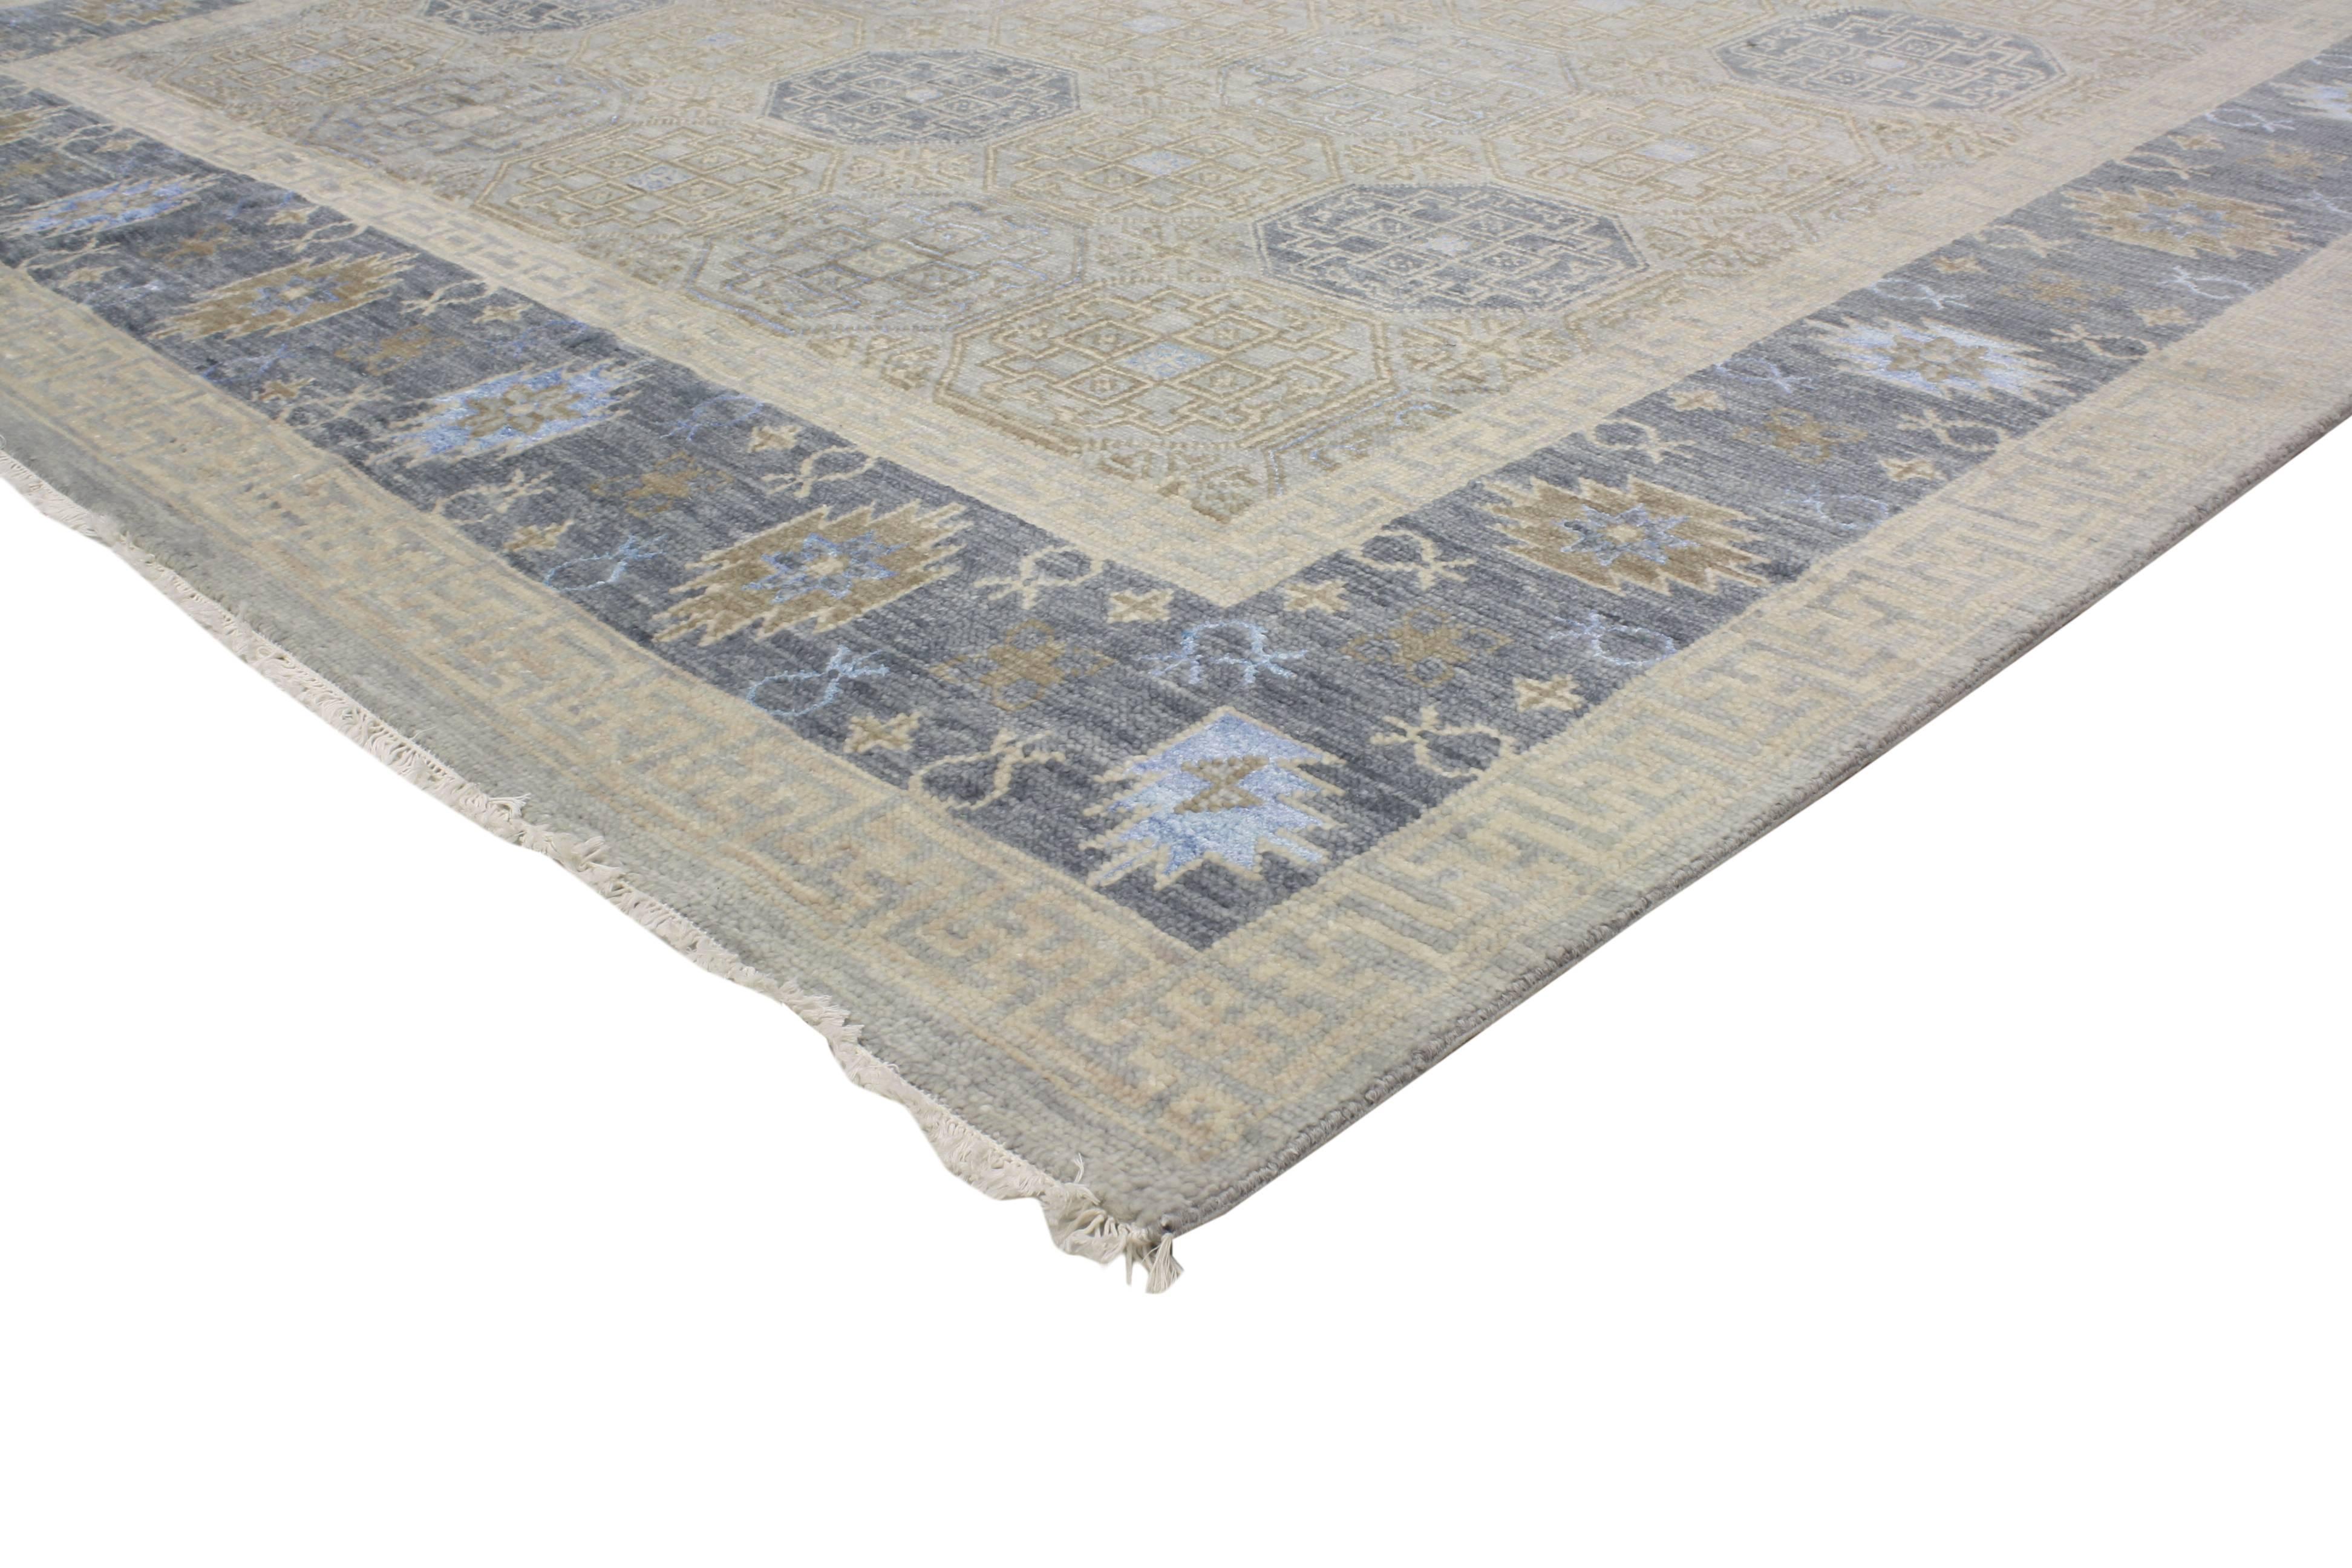 30325 New Transitional Khotan Design Geometric Area Rug, 09'01 x 11'07. This hand-knotted wool and silk transitional Khotan design geometric area rug features a repetitive octagonal motif pattern in alternating colors. Polished and playful combined